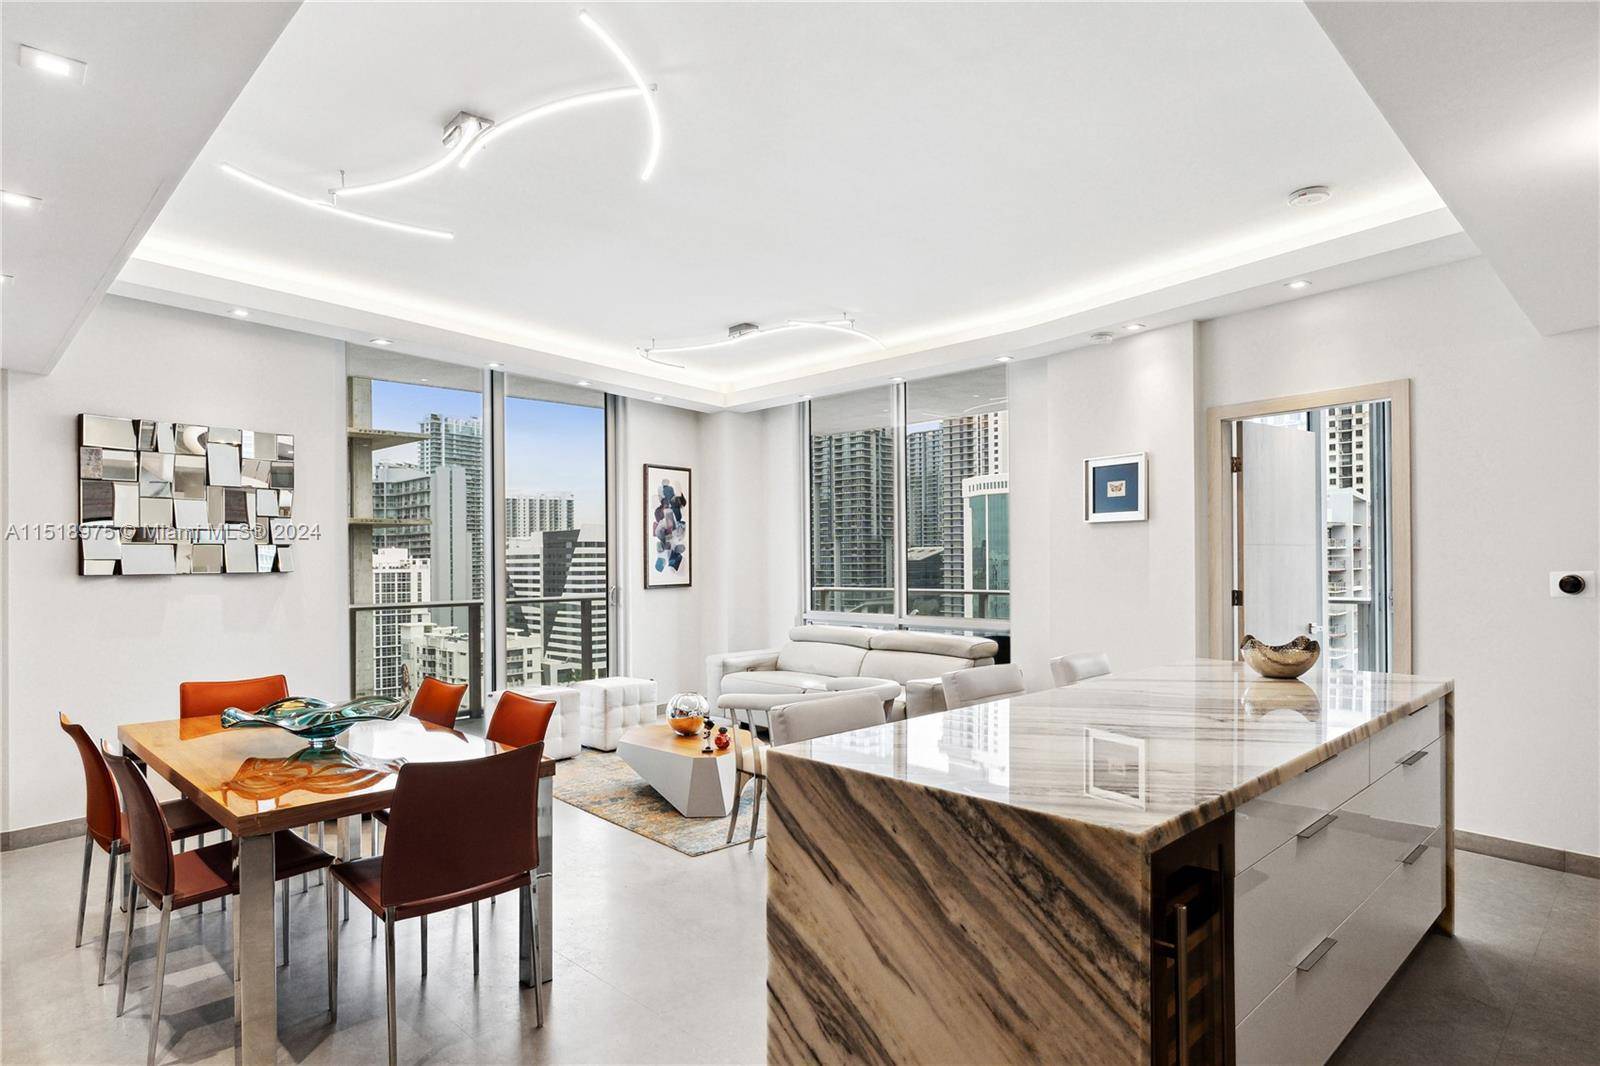 Welcome to Lower Penthouse 3 at Brickell Ten, a fully furnished gem available for immediate move in.